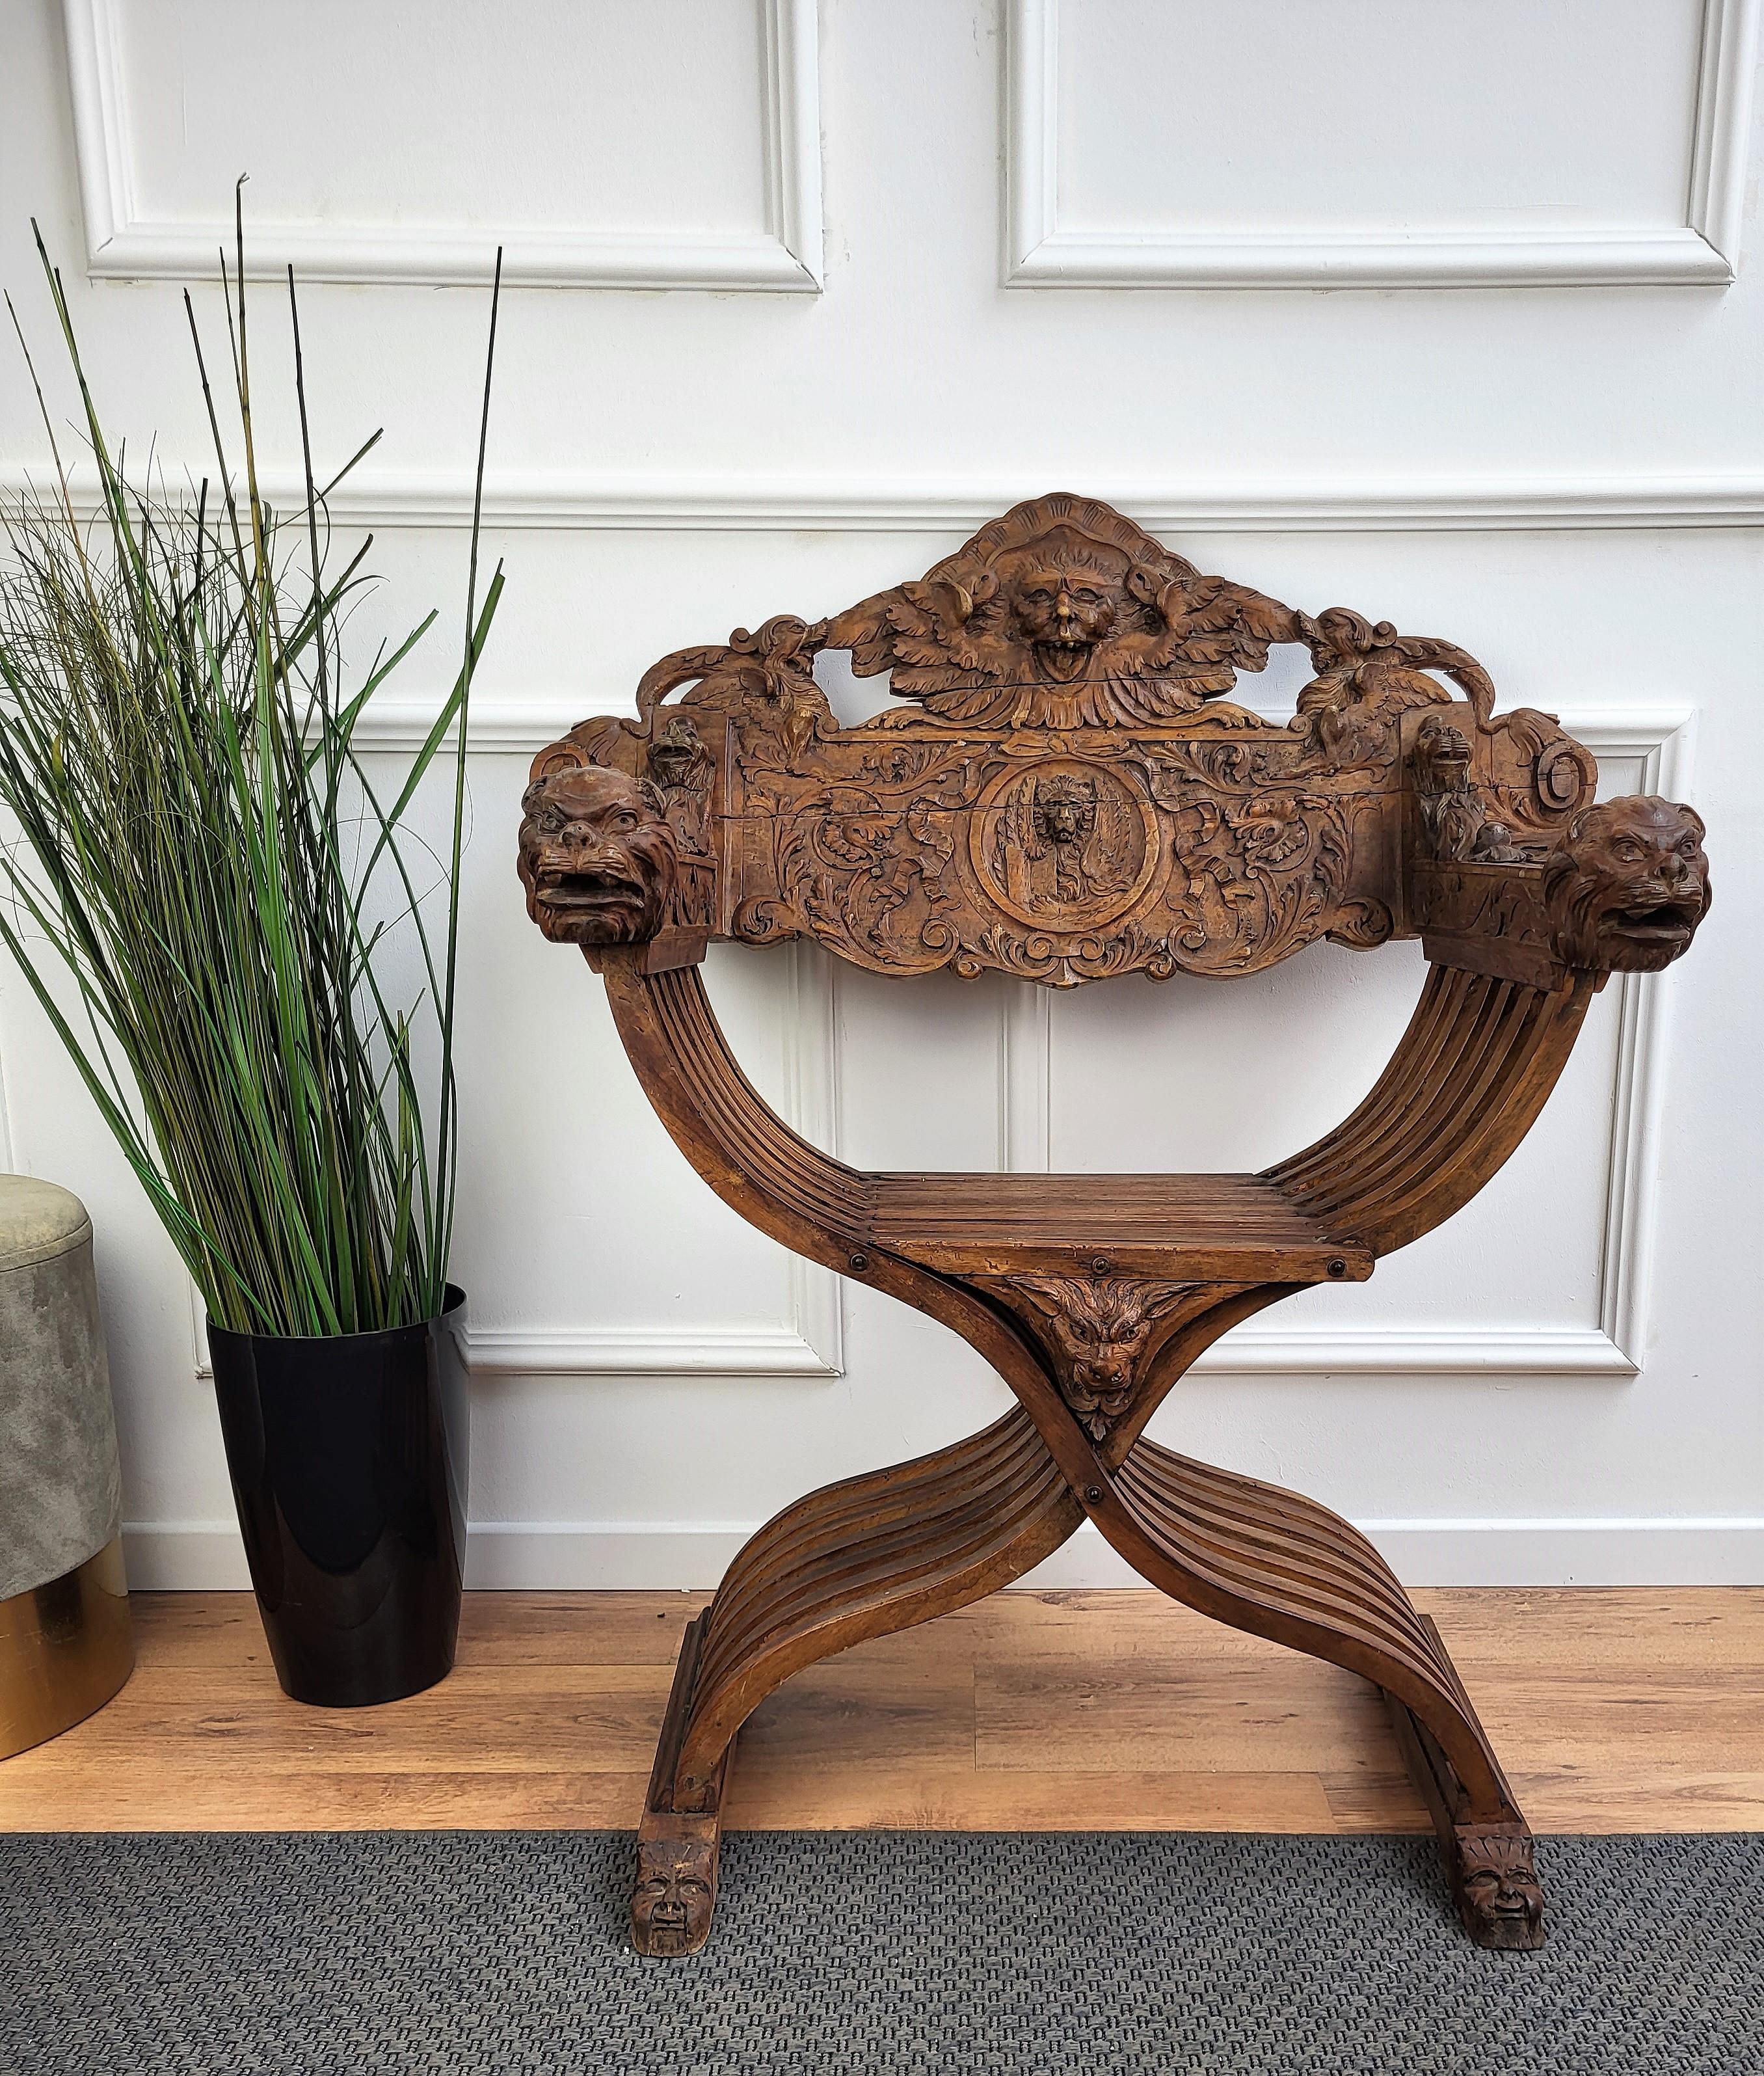 Impressive and fully original Renaissance Savonarola chair in amazingly carved walnut, it looks simply stunning. The backrail, the armrests start and ending, the front and back feet, the central crossing are all decorated with incredibly hand-carved